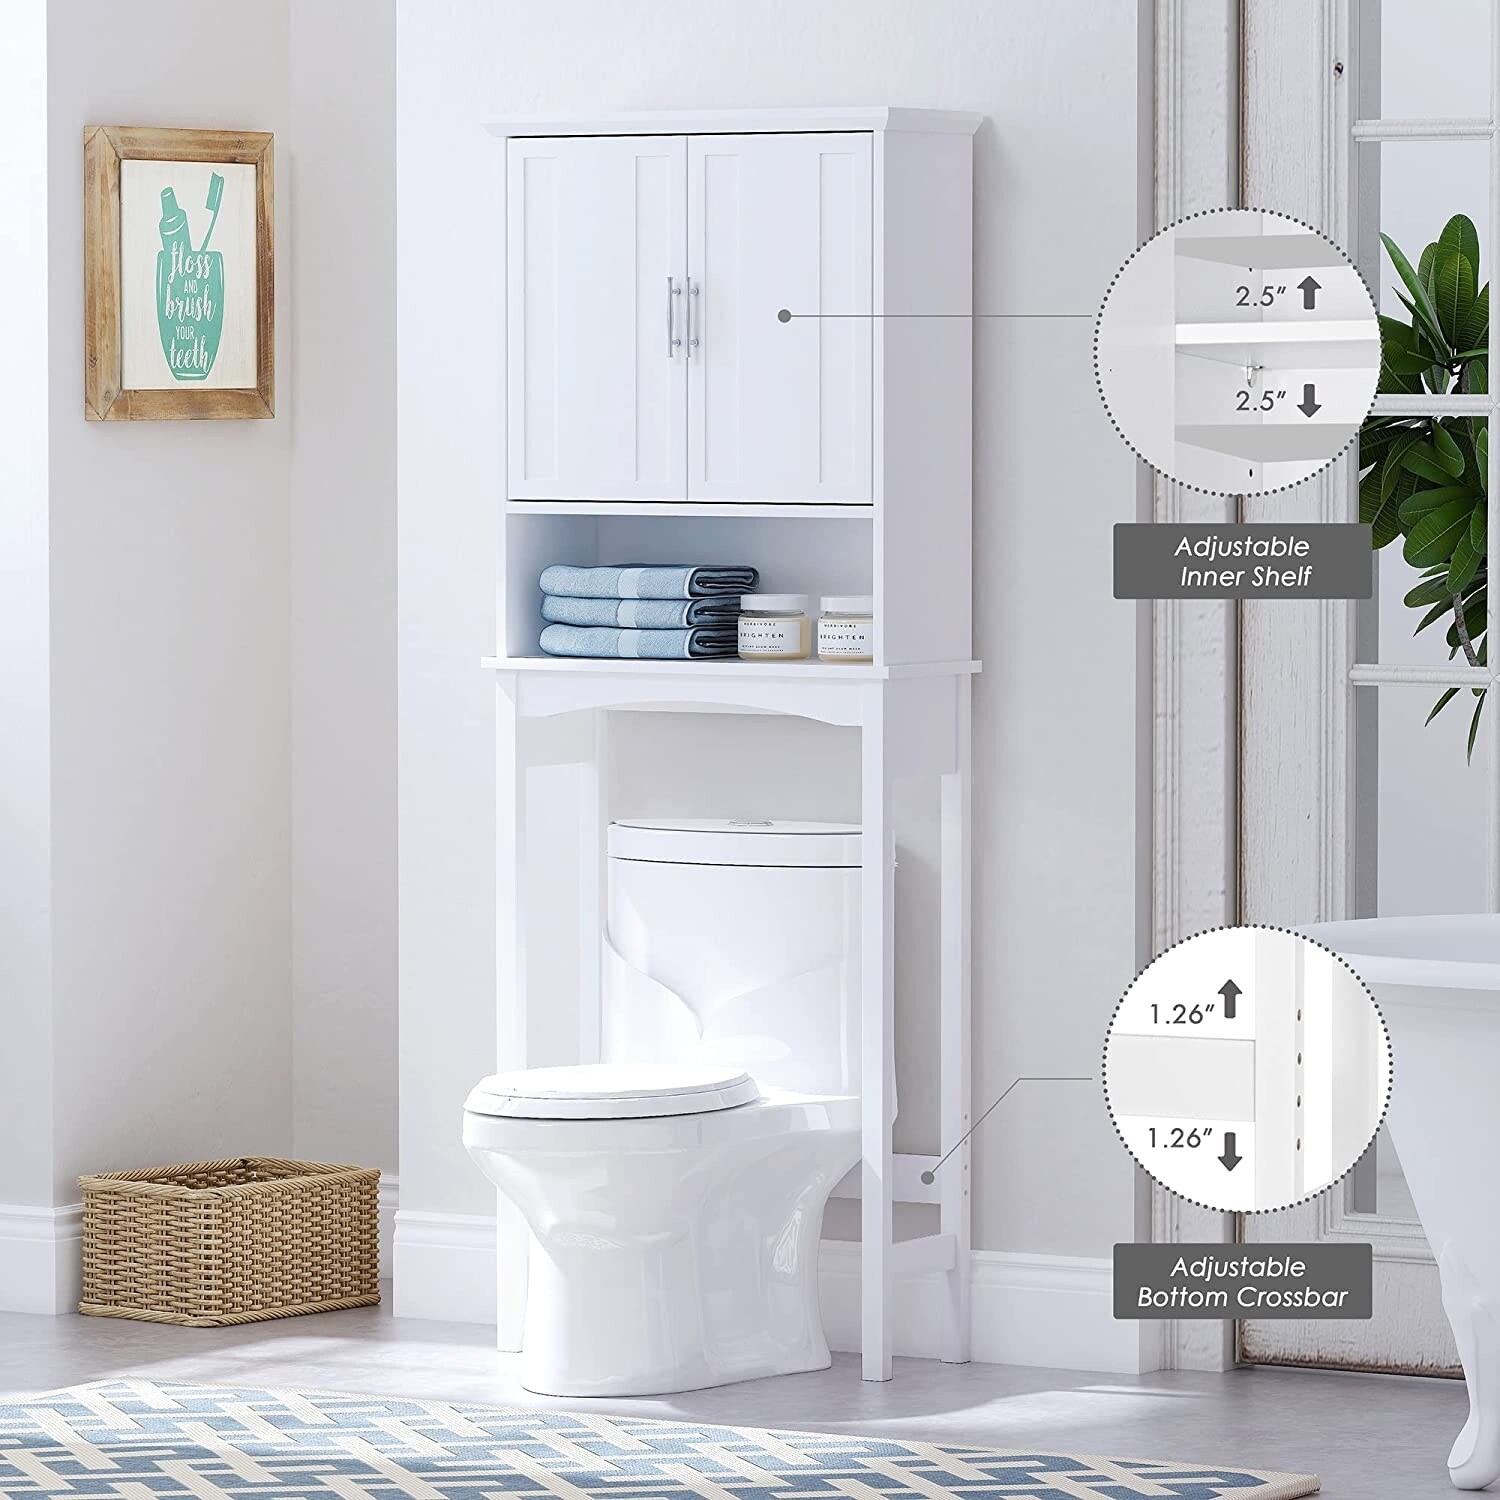 https://ak1.ostkcdn.com/images/products/is/images/direct/f7de4d273db3f7a32f60215f1720860263b2158c/Spirich-Home-Over-The-Toilet-Storage-Cabinet%2C-Bathroom-Shelf-Over-Toilet%2C-Bathroom-Organizer-Space-Saver%2C-White.jpg